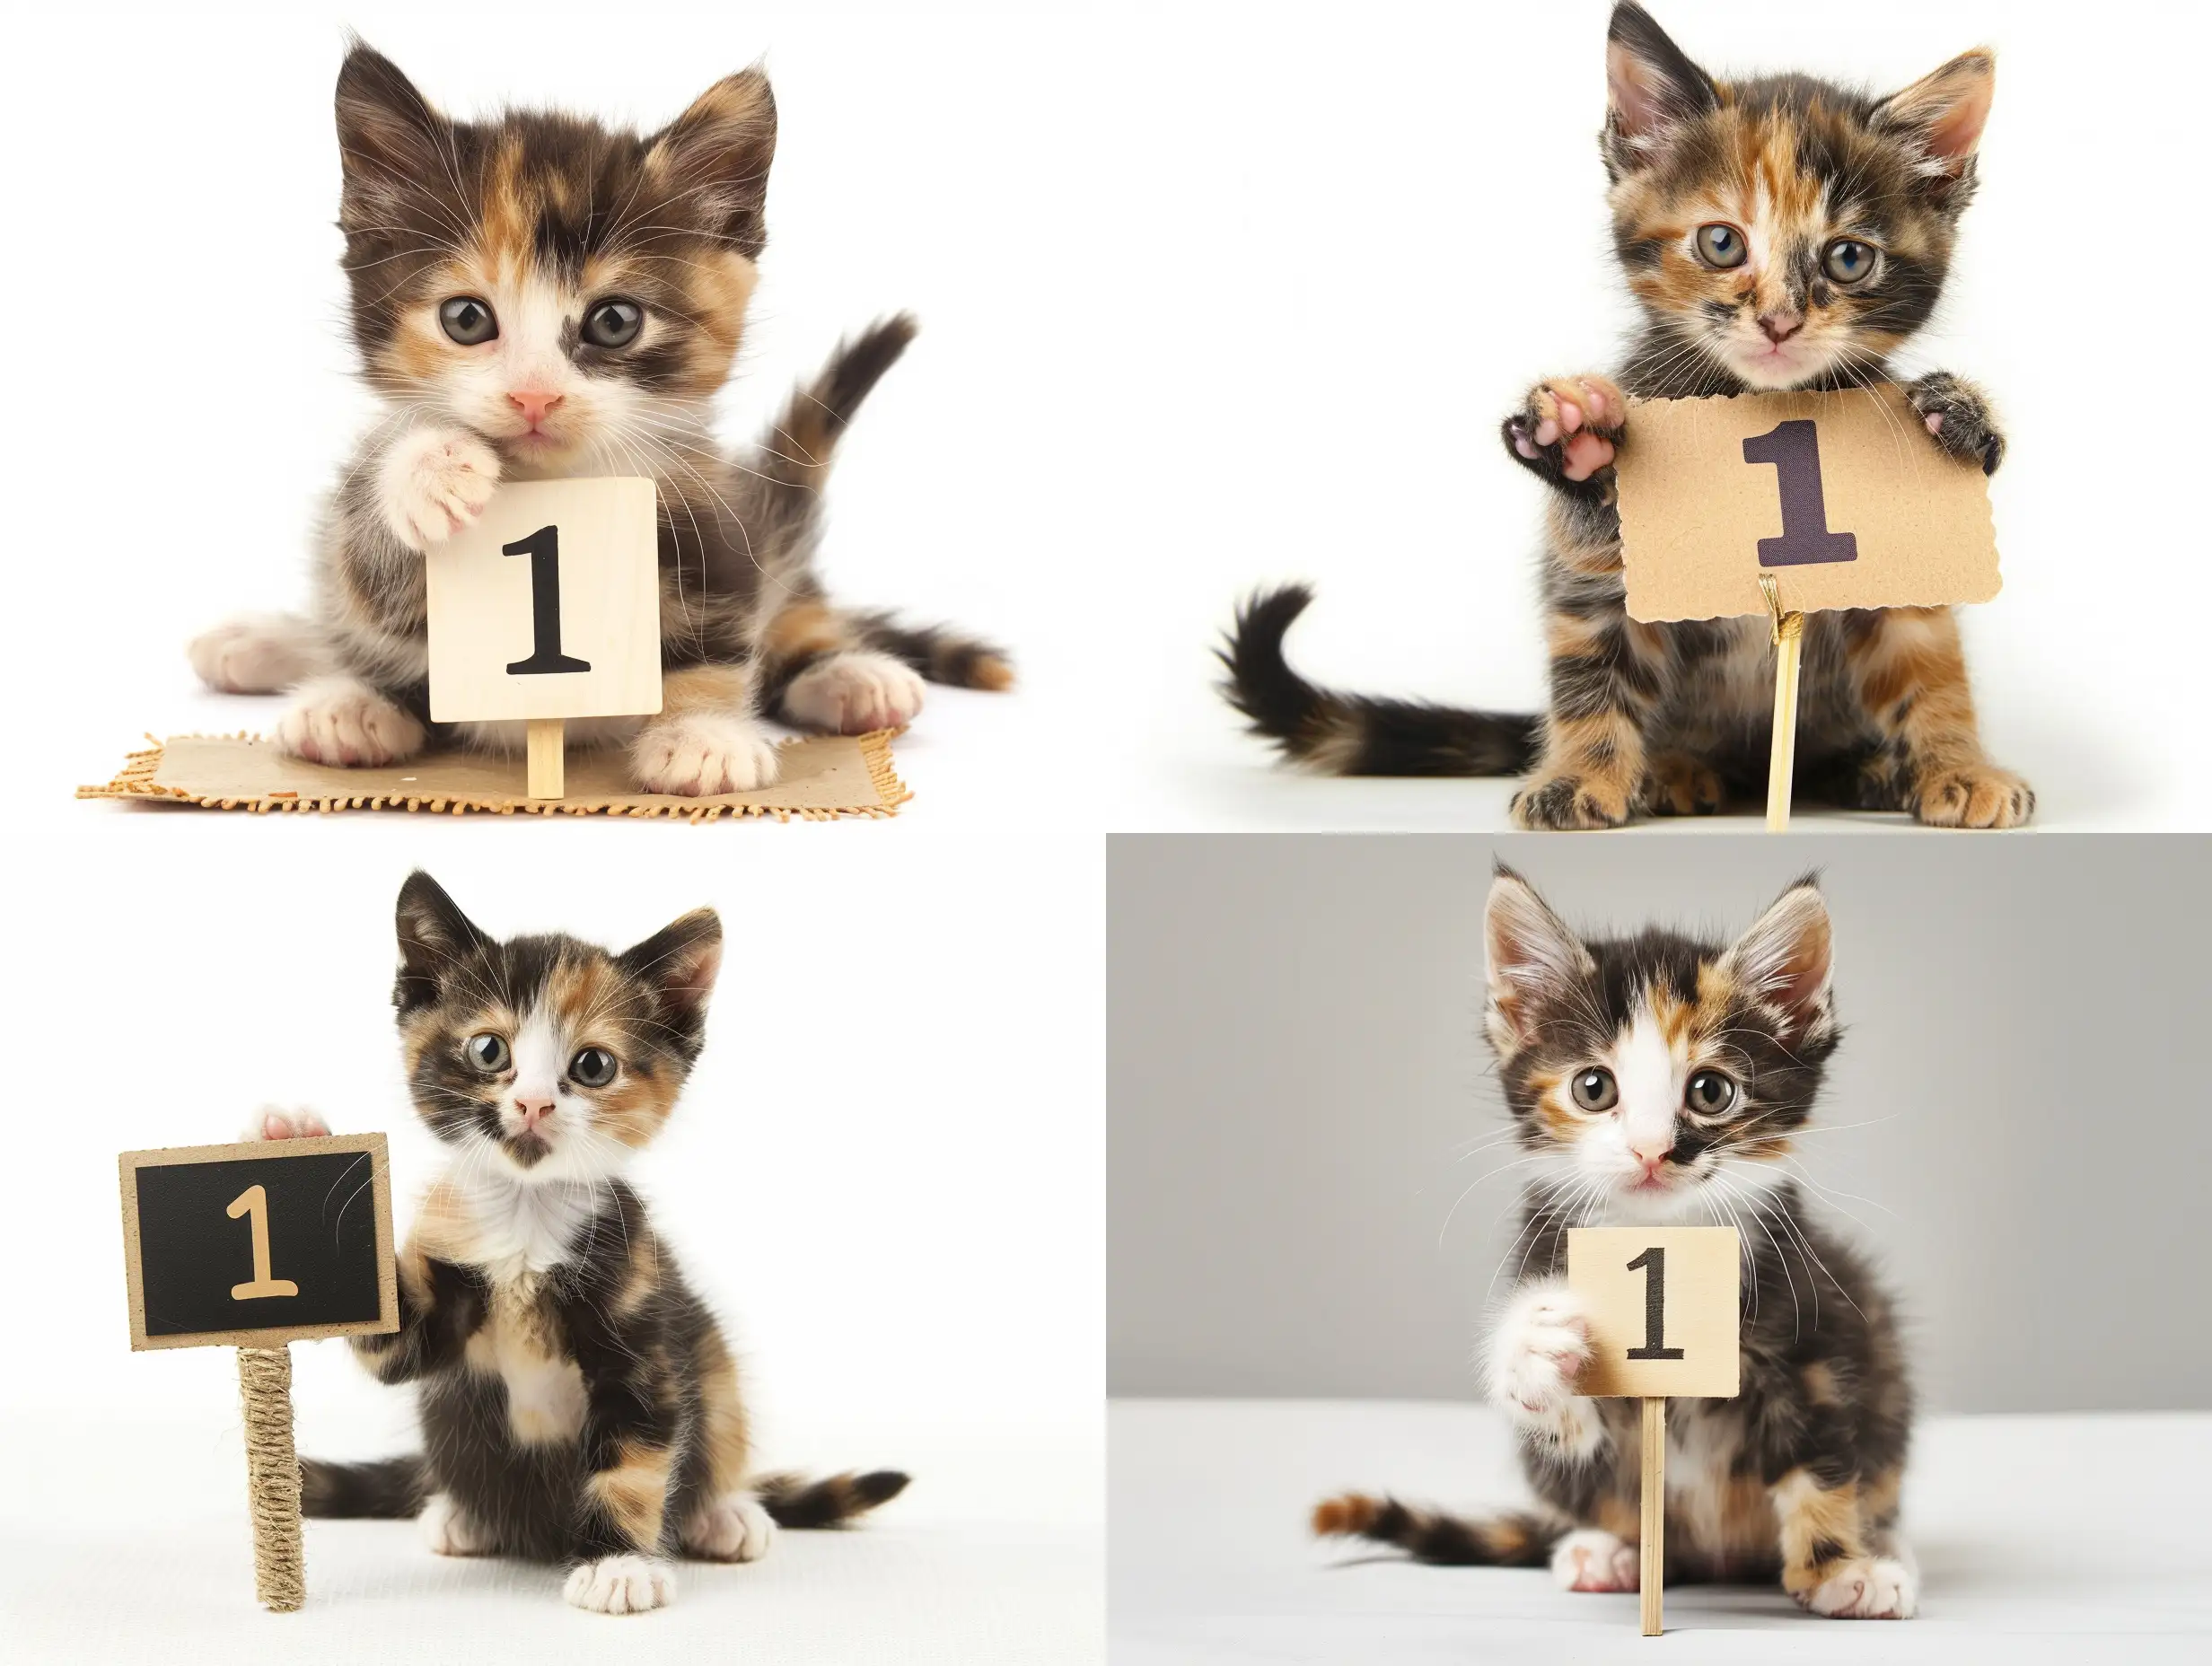 a small calico kitten holding a sign with the number 1
